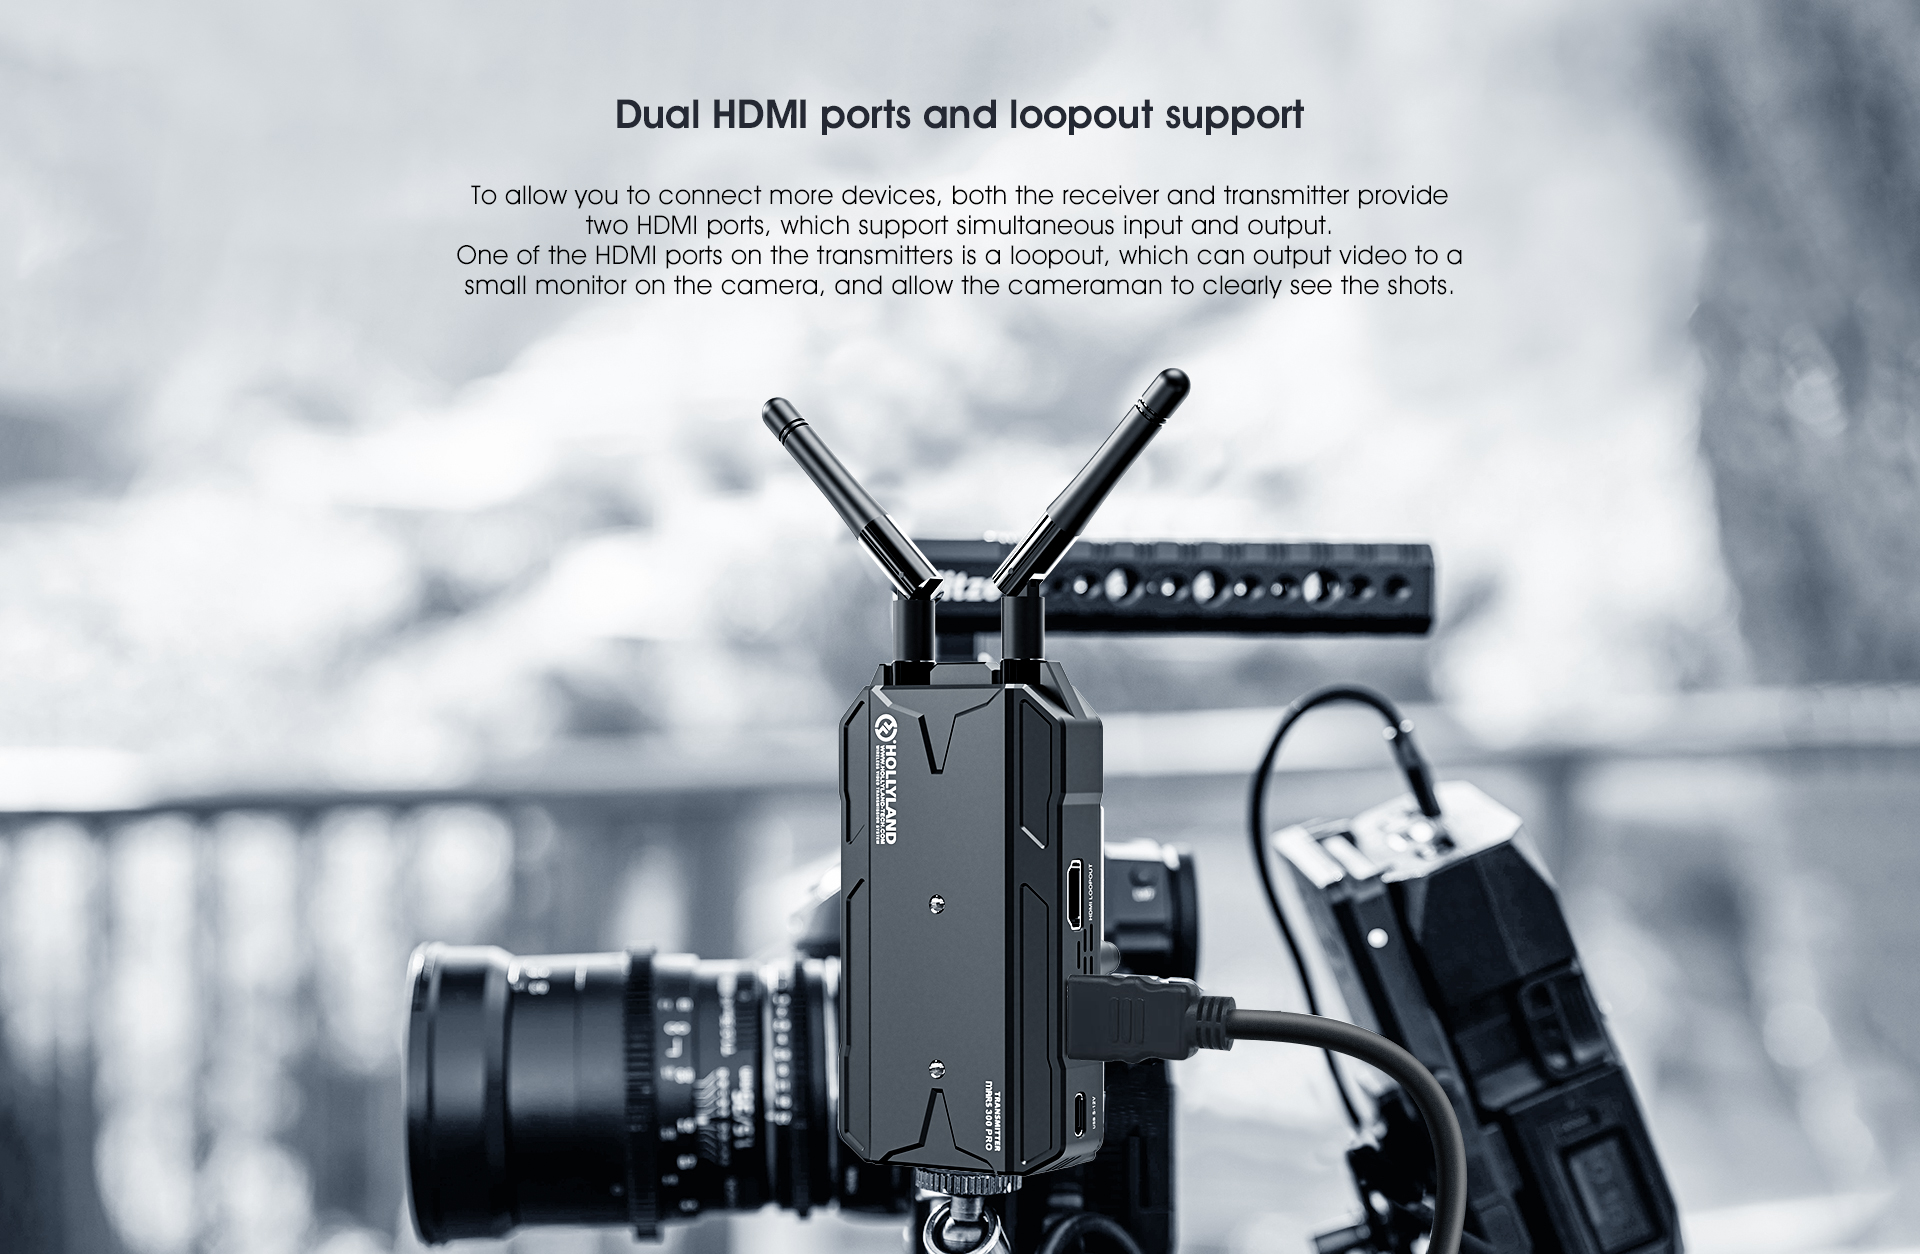 Wireless HDMI Video Transmission System Hollyland/Moma Mars 300 5G Image Dual HDMI Input/Output Transmitter and Receiver Kit Support HD 1080P 300 Feet for DSLR Mirrorless Camera Gimbal Stabilizer 